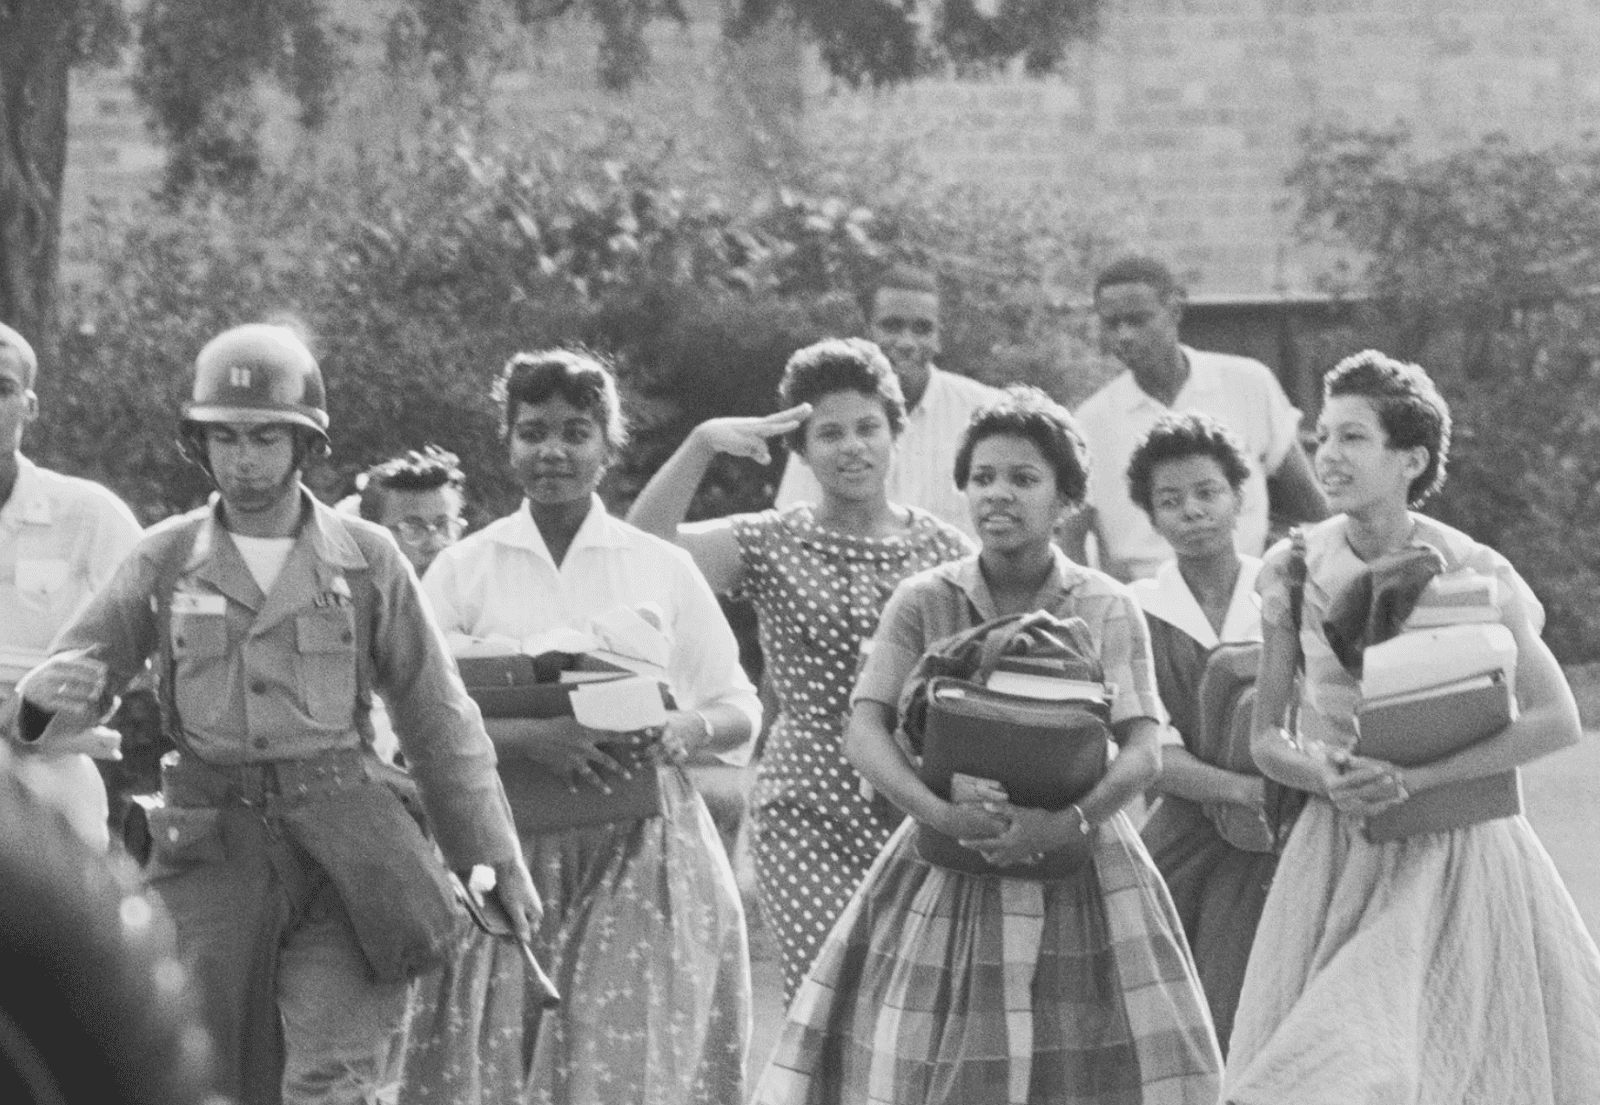 The Little Rock Nine being escorted to school in 1957